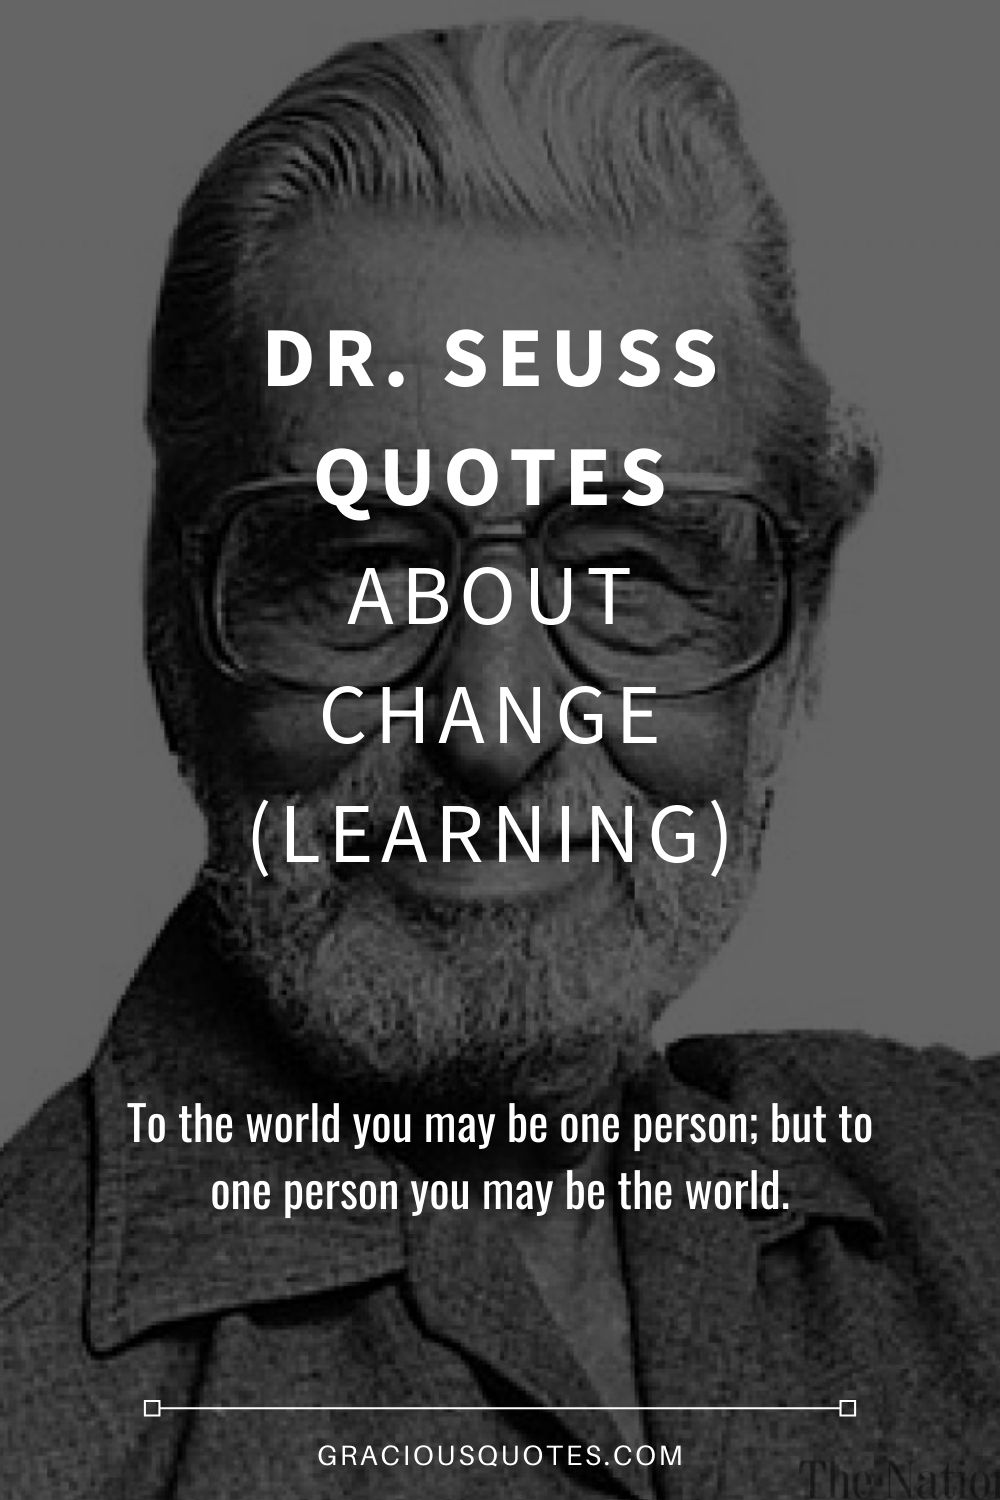 Dr. Seuss Quotes About Change (LEARNING) - Gracious Quotes